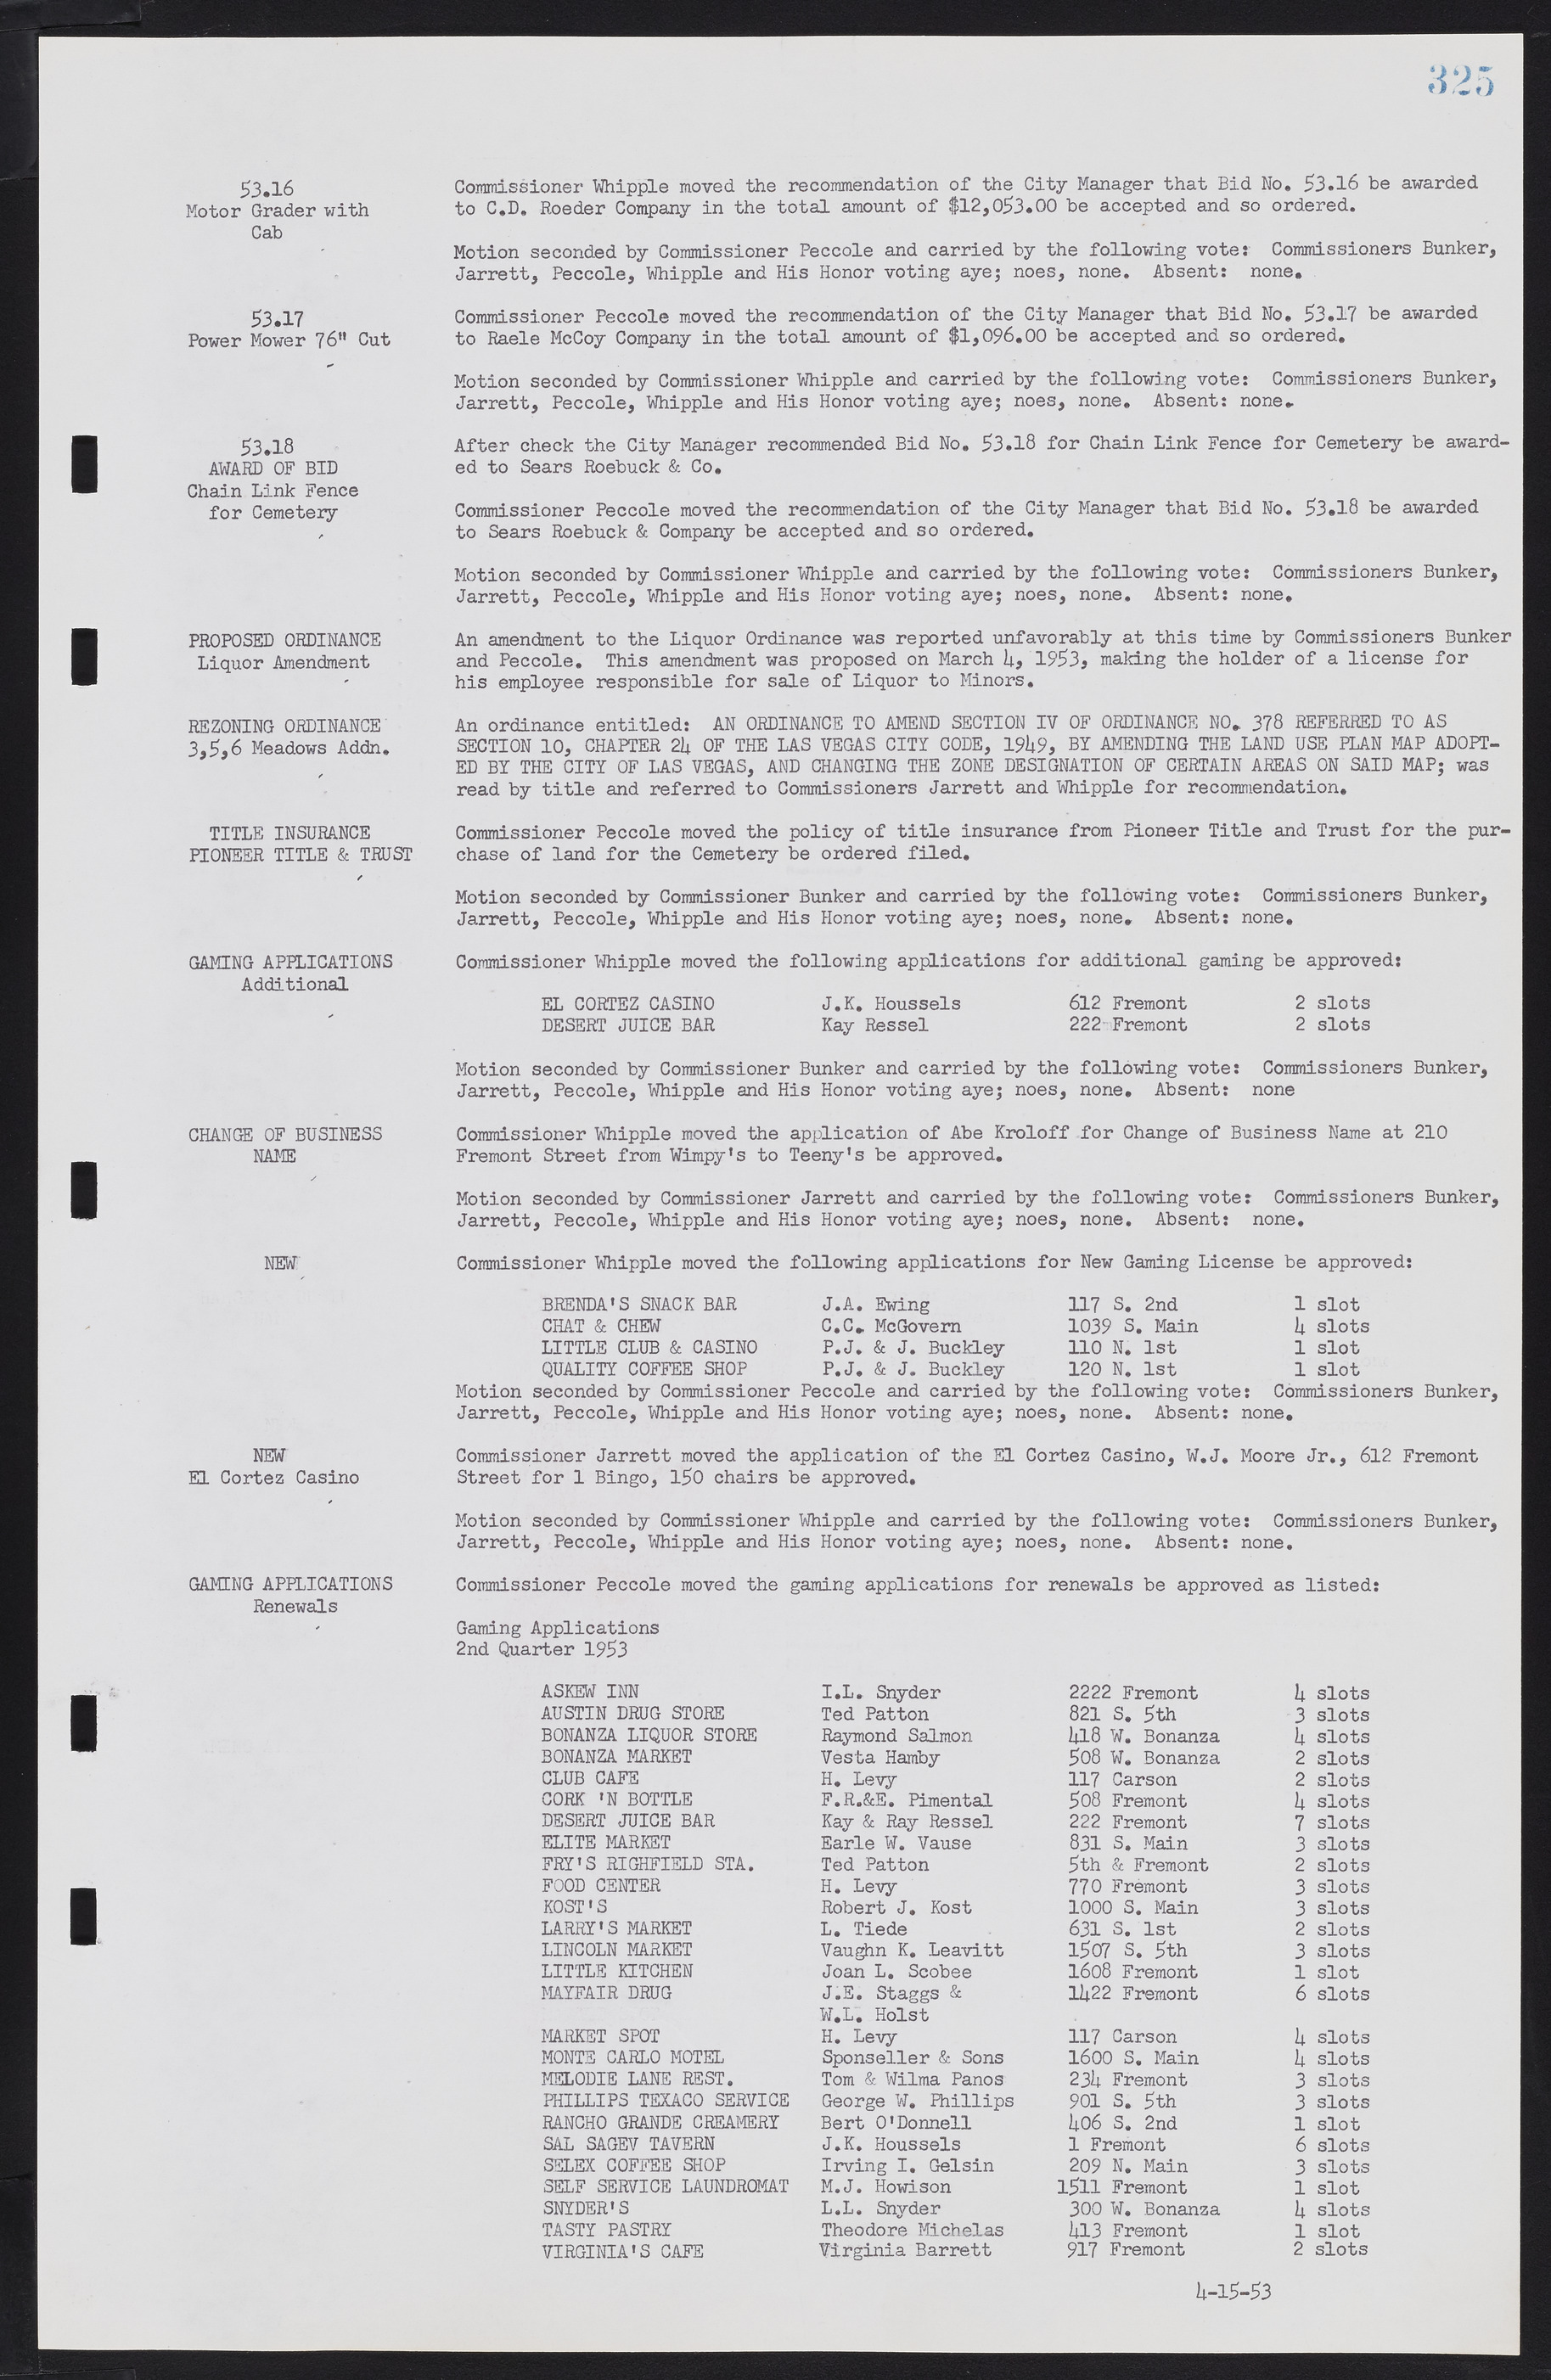 Las Vegas City Commission Minutes, May 26, 1952 to February 17, 1954, lvc000008-353